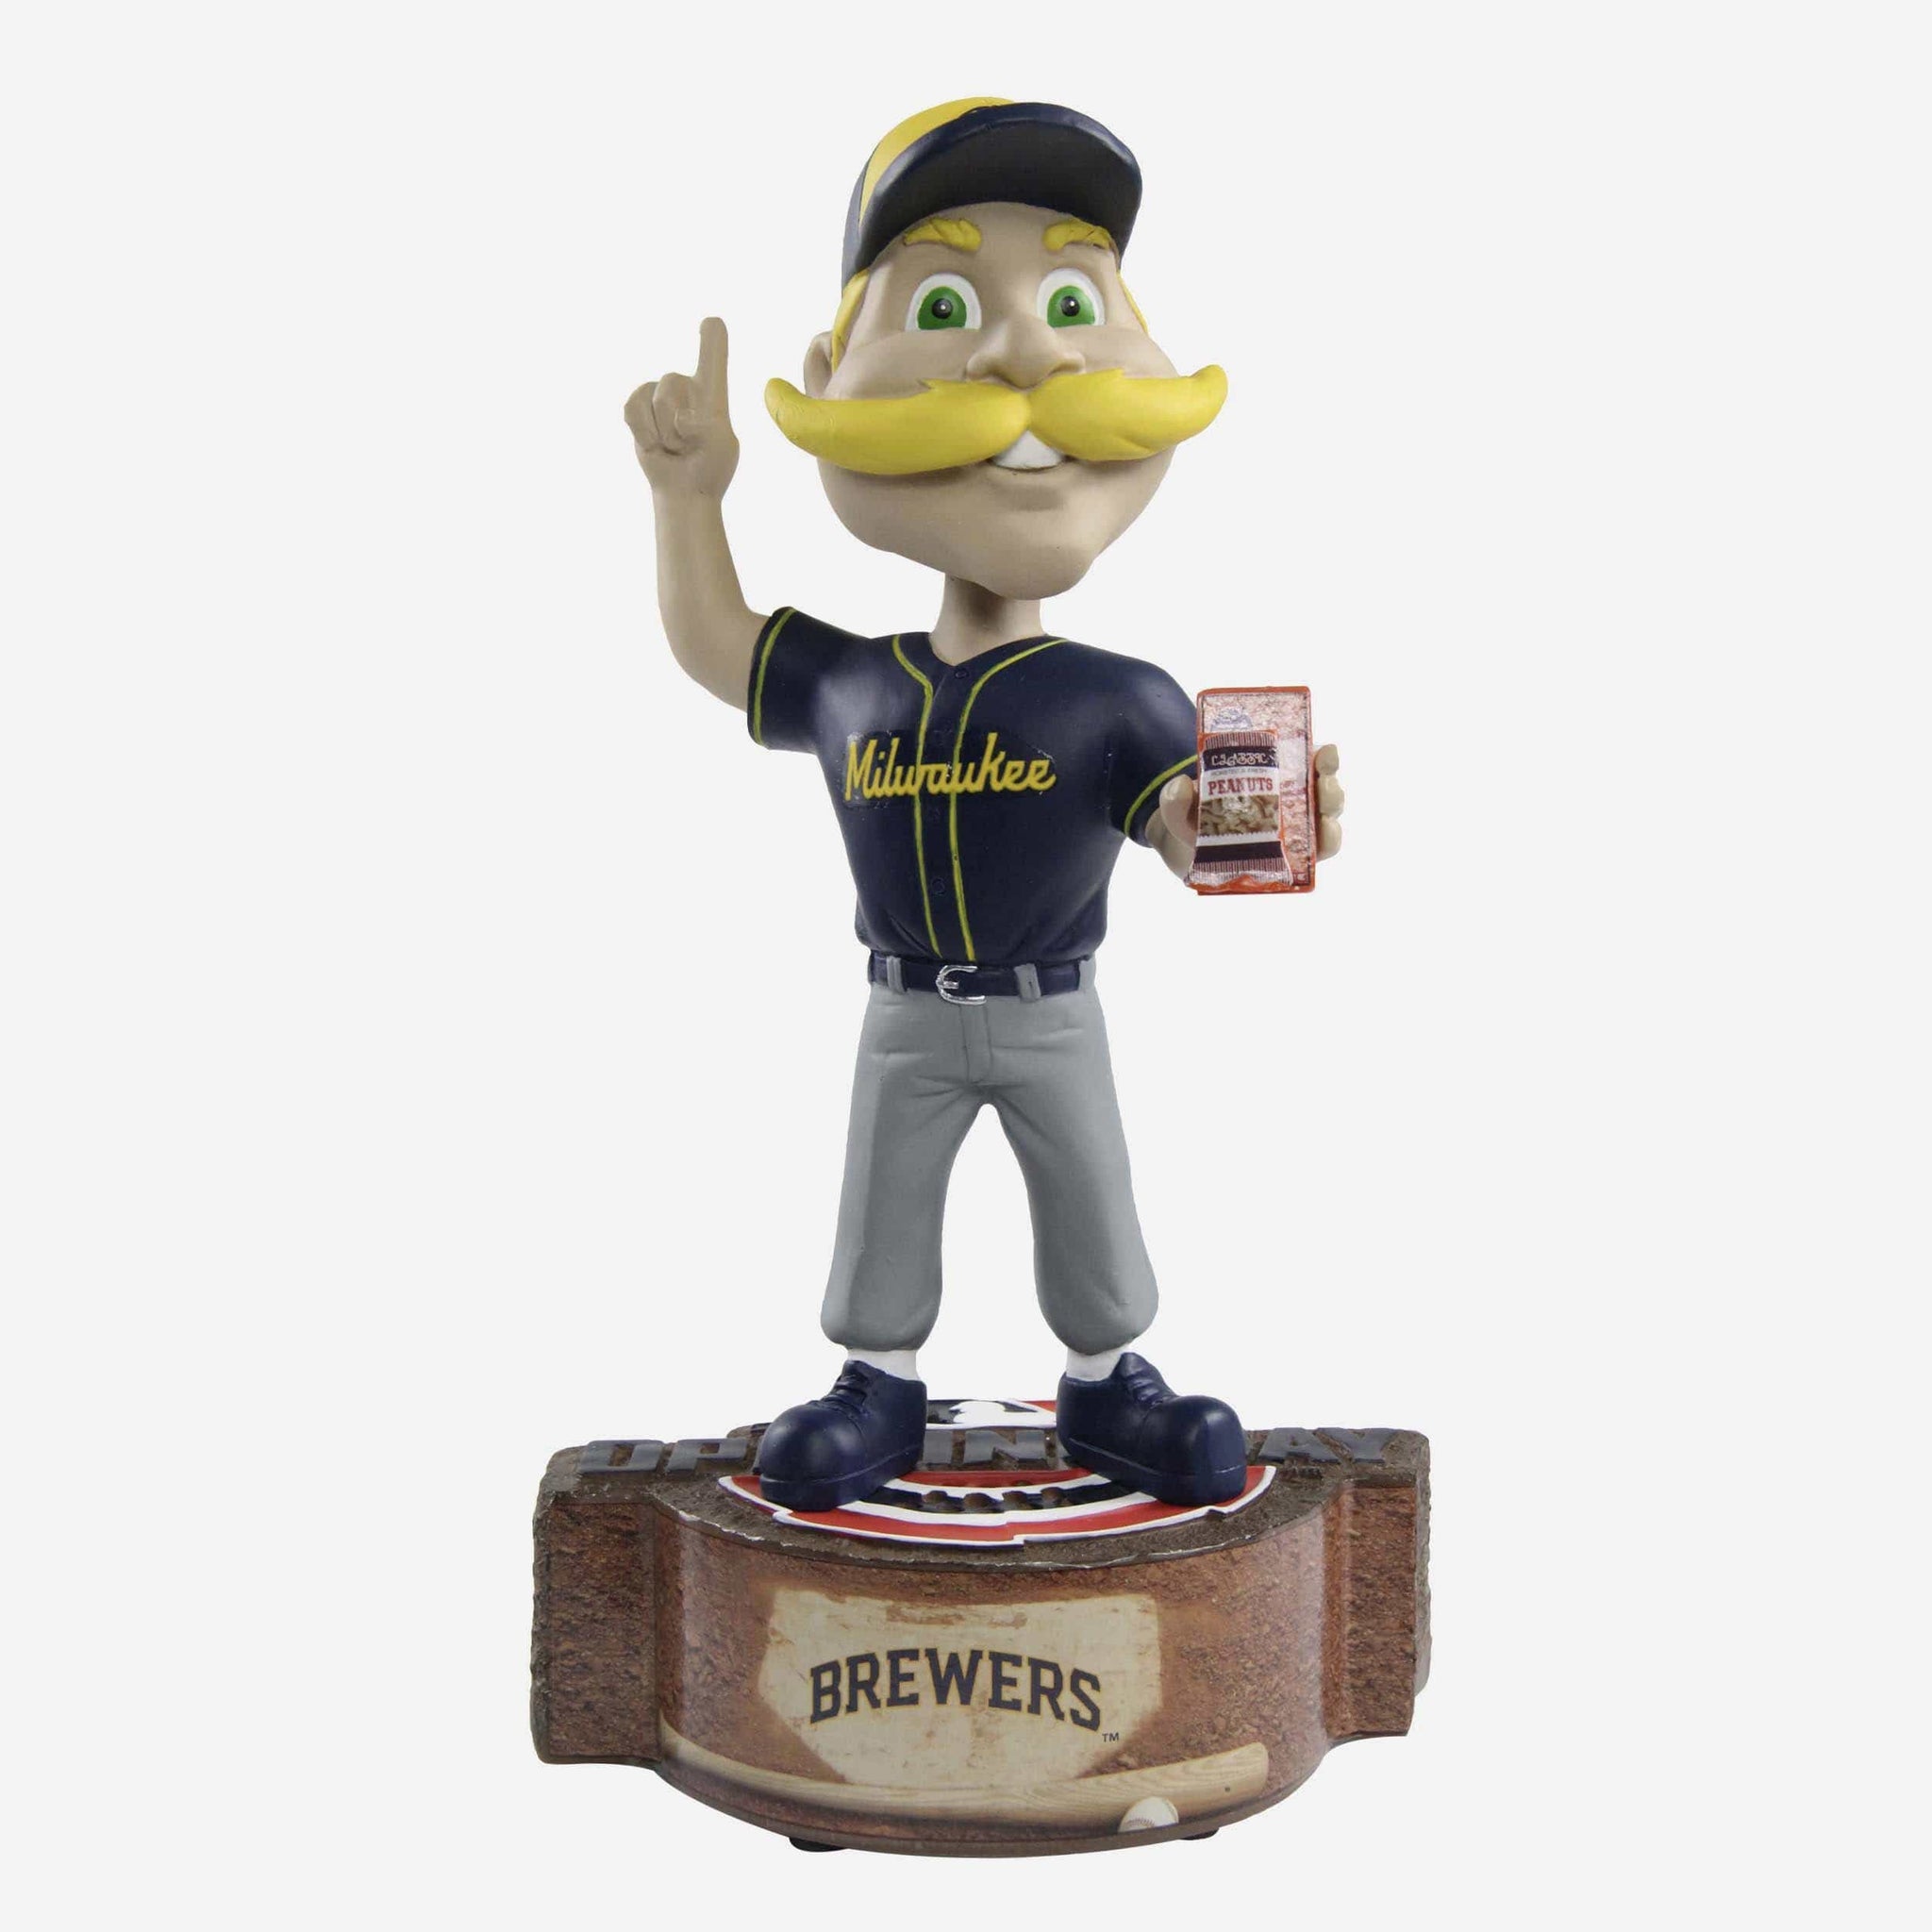 Here's the schedule of promos and bobbleheads for the 2023 Brewers season